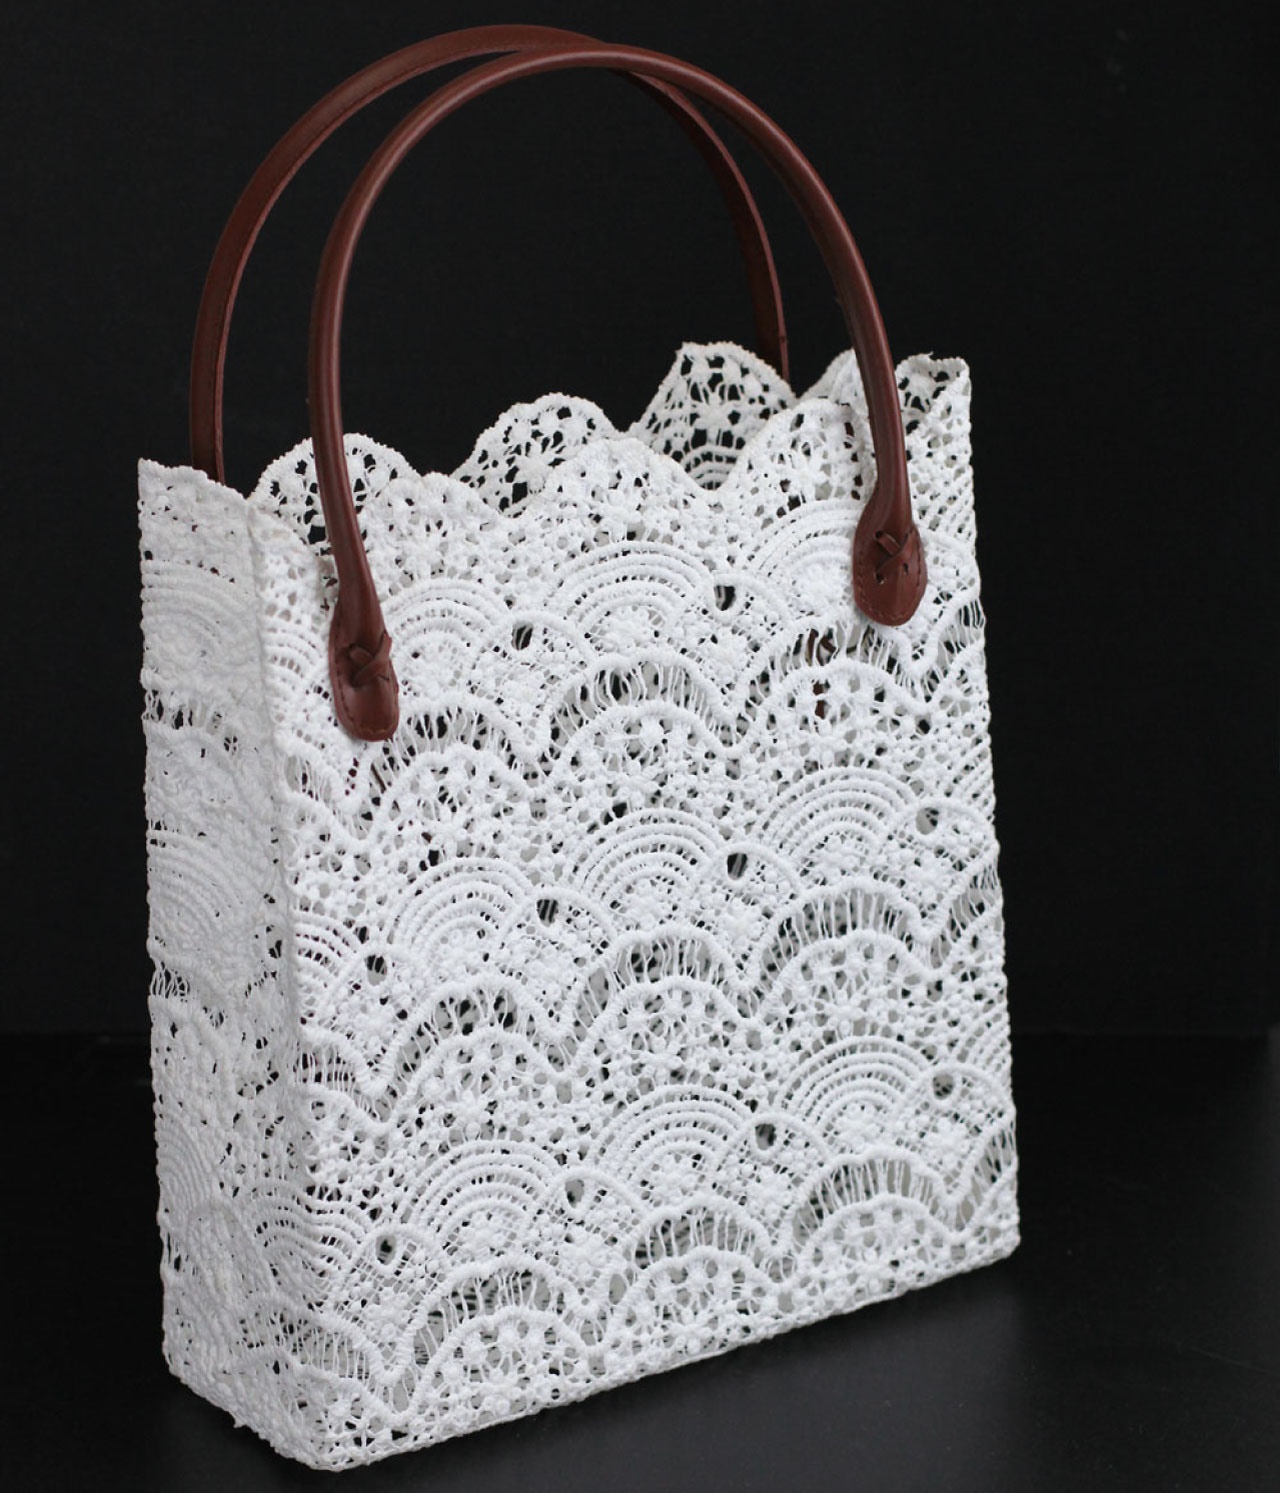 11" x 11.5" x 4" White Lace Bag with Brown Handles - Click Image to Close